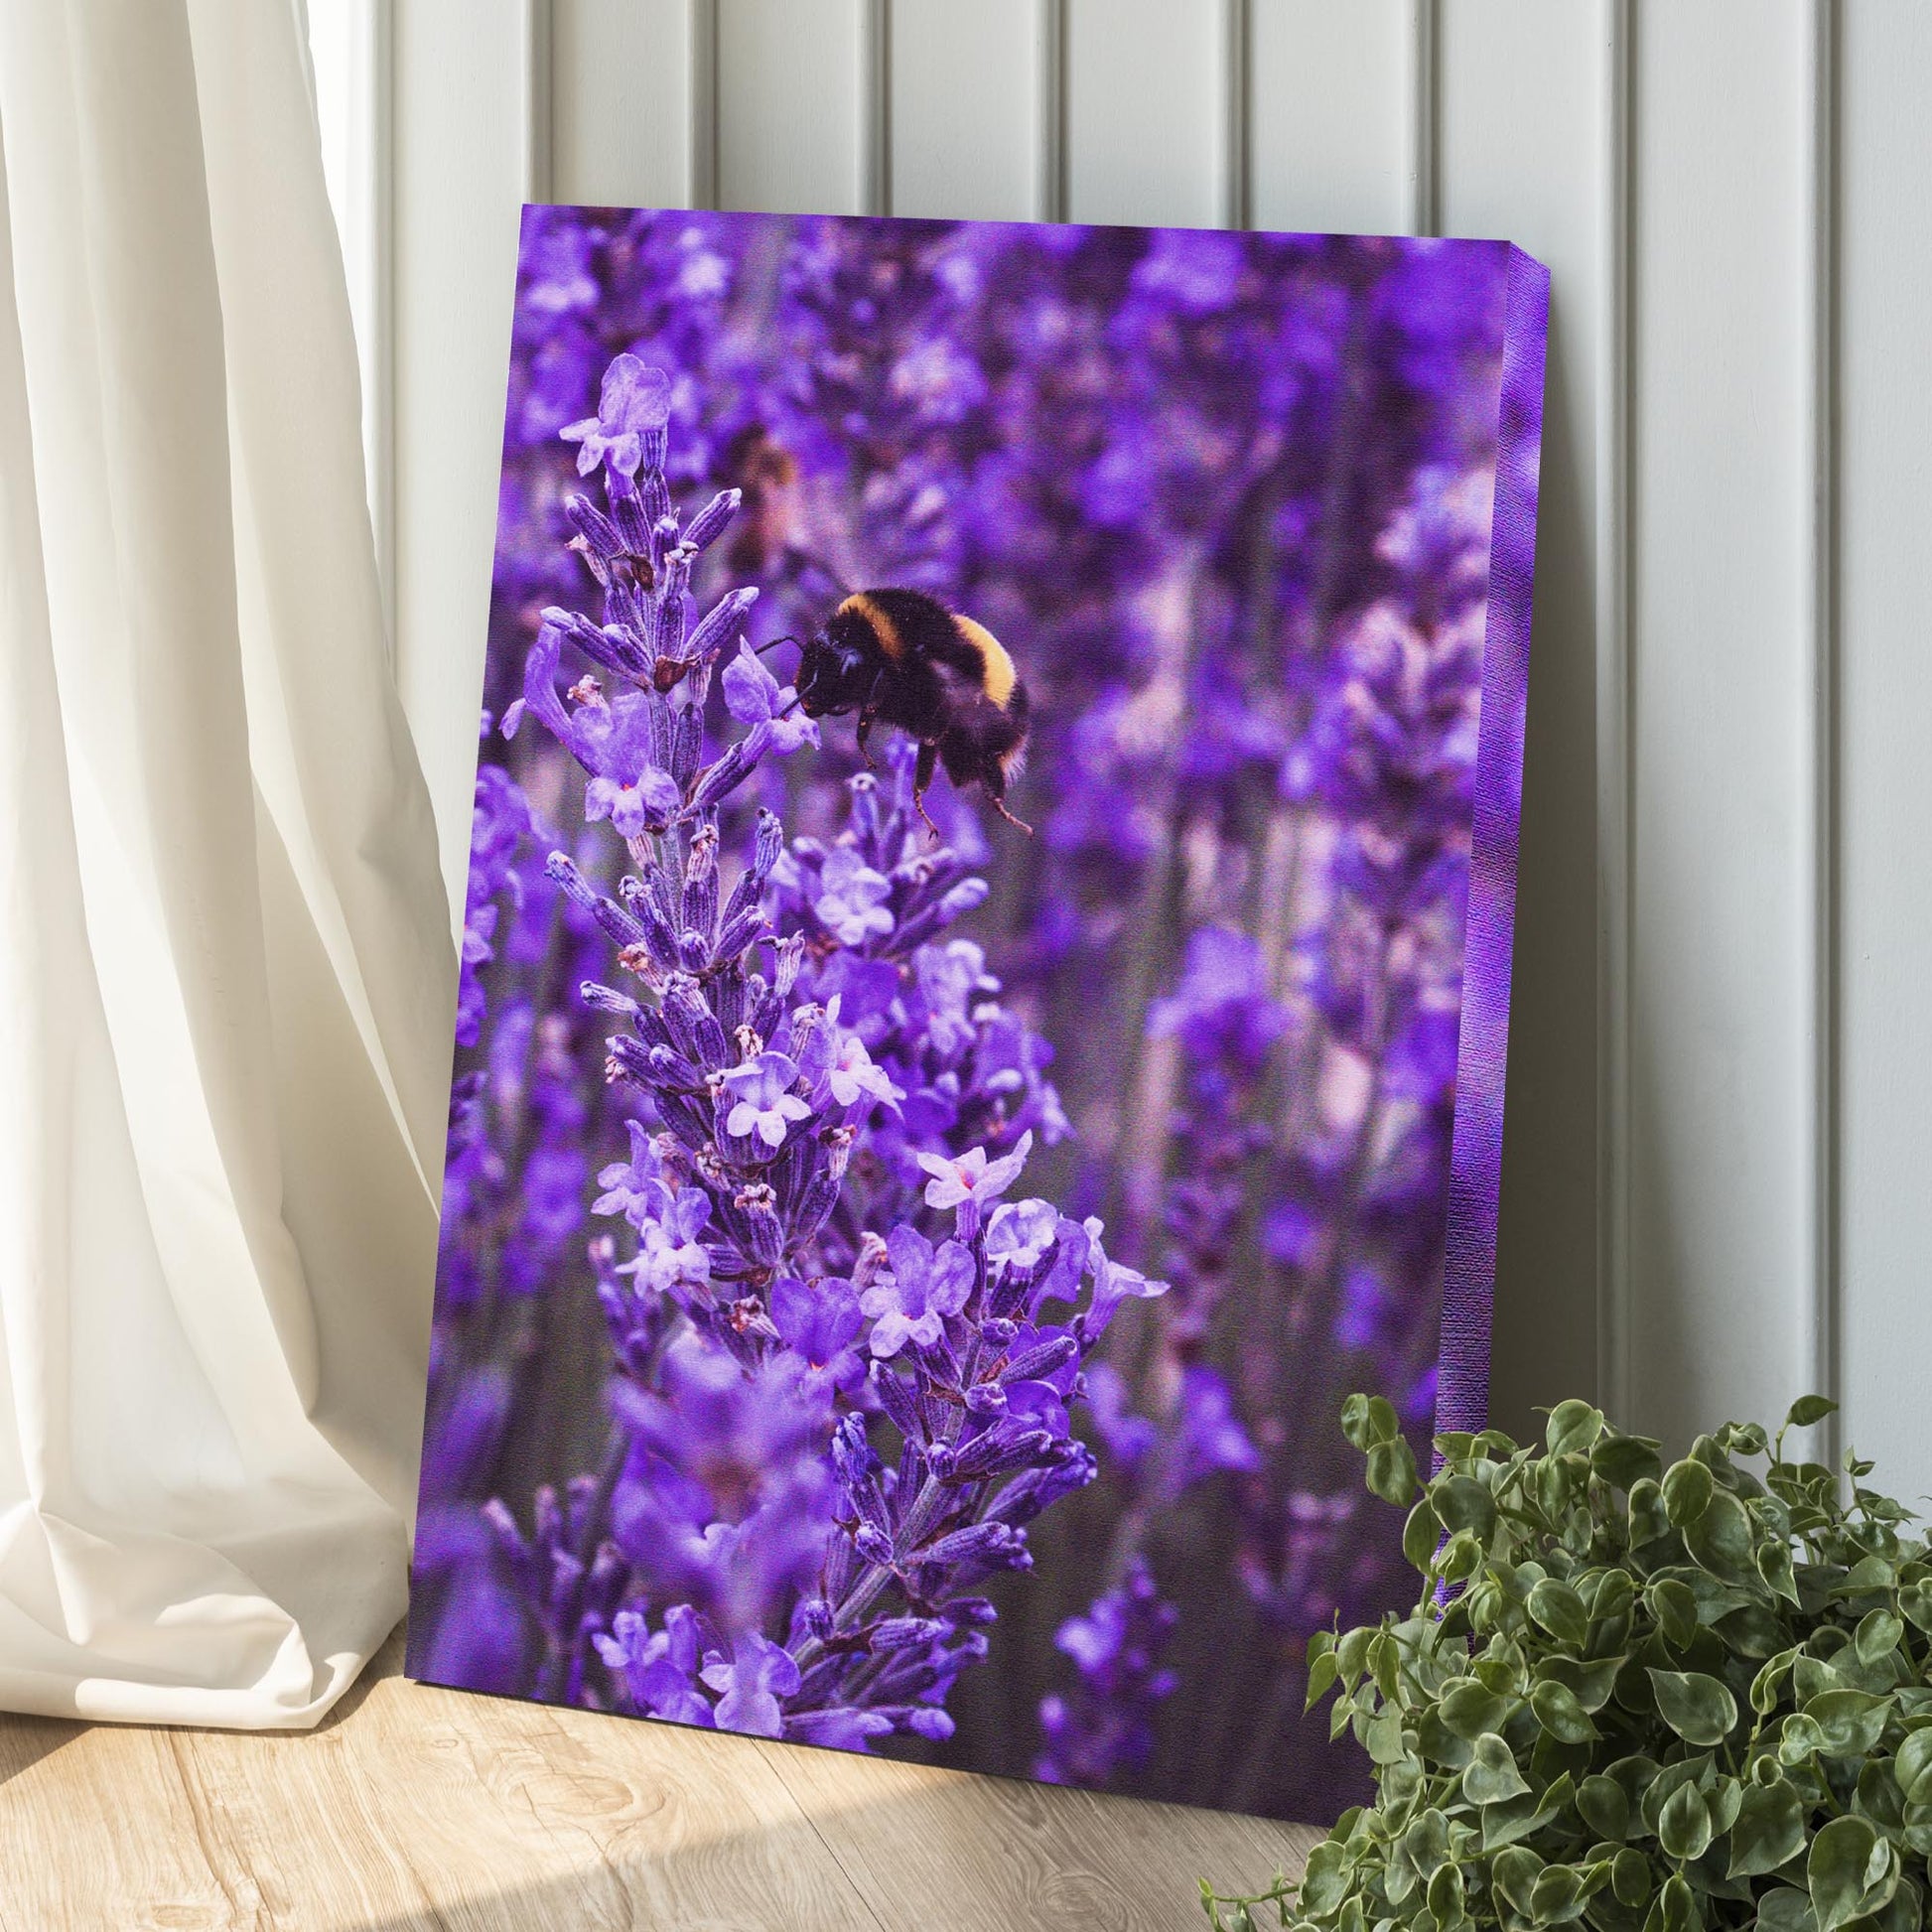 Bee Among Lavender Fields Canvas Wall Art Style 1 - Image by Tailored Canvases